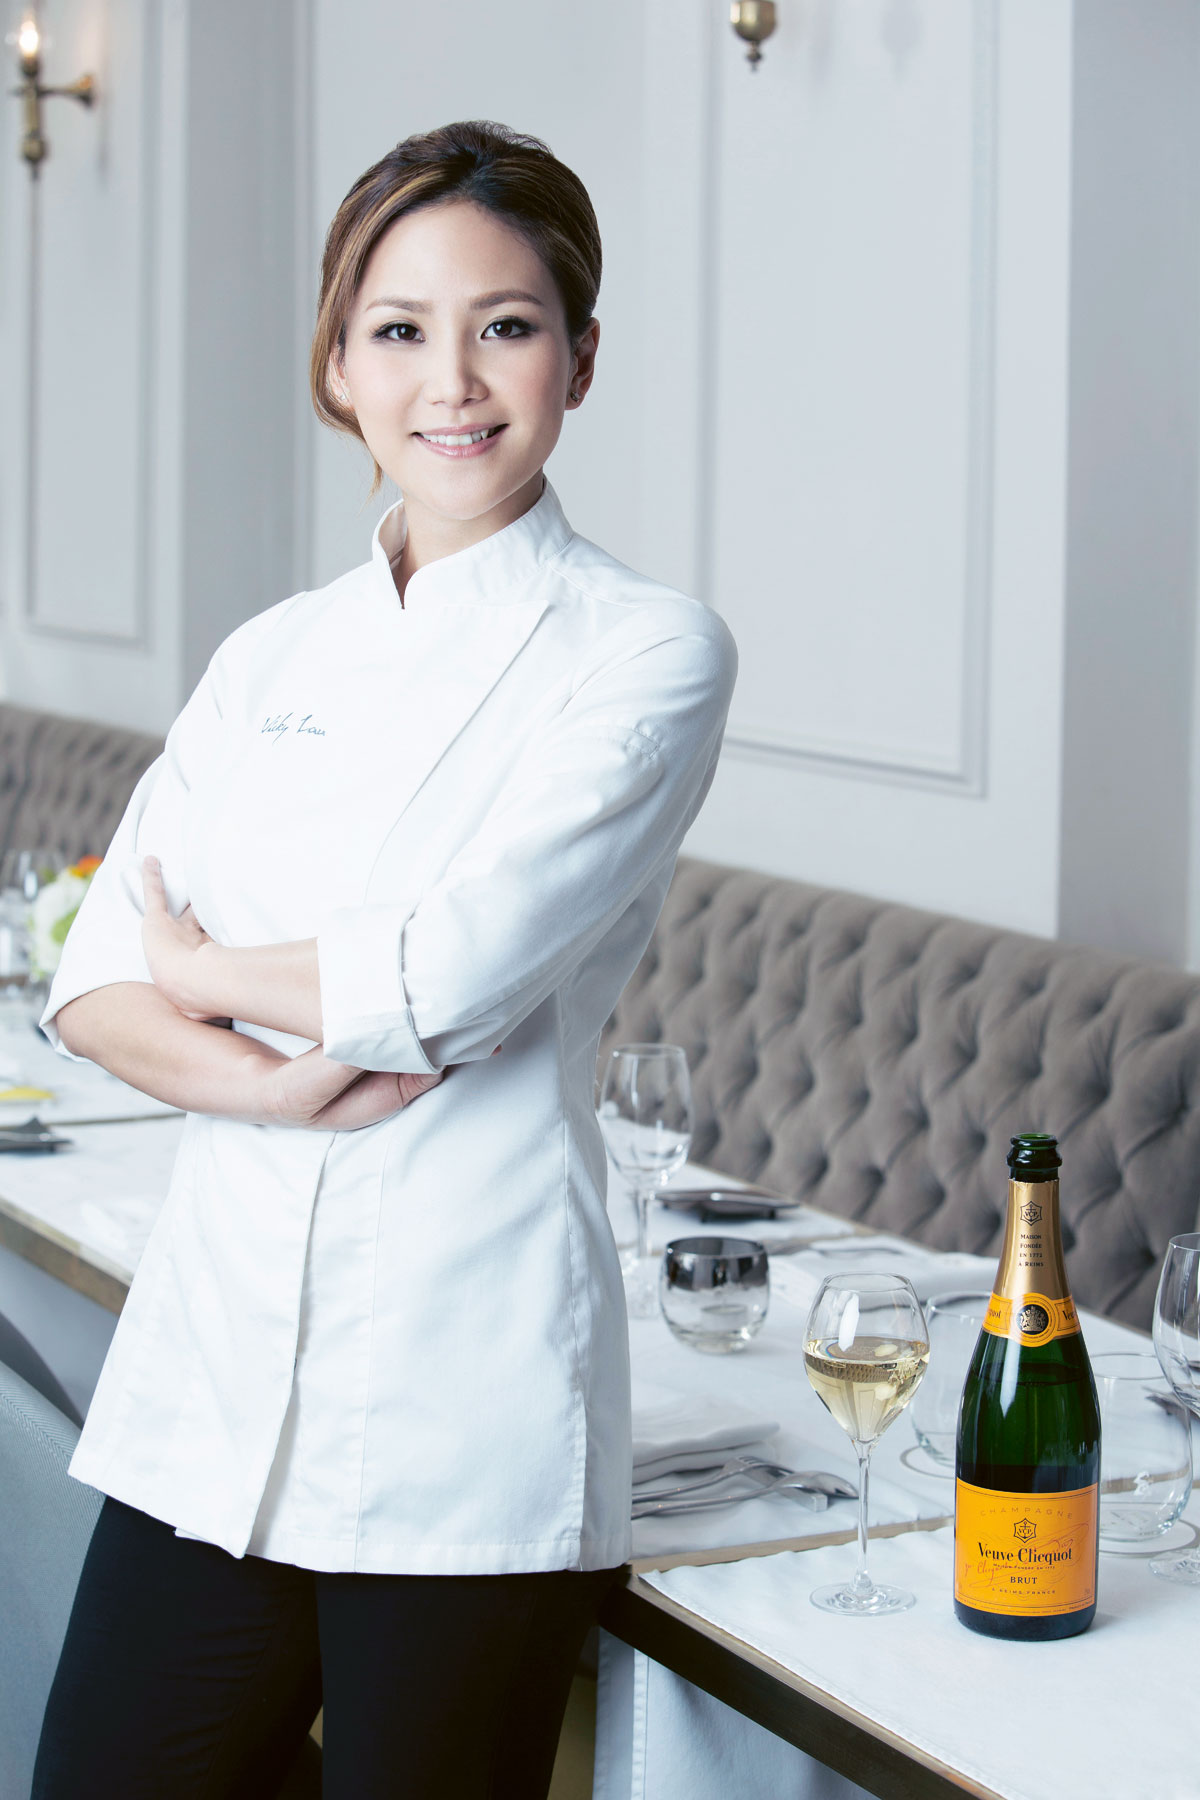 Vicky Lau, Asia’s Best Female Chef 2015, was a graphic designer before becoming a chef